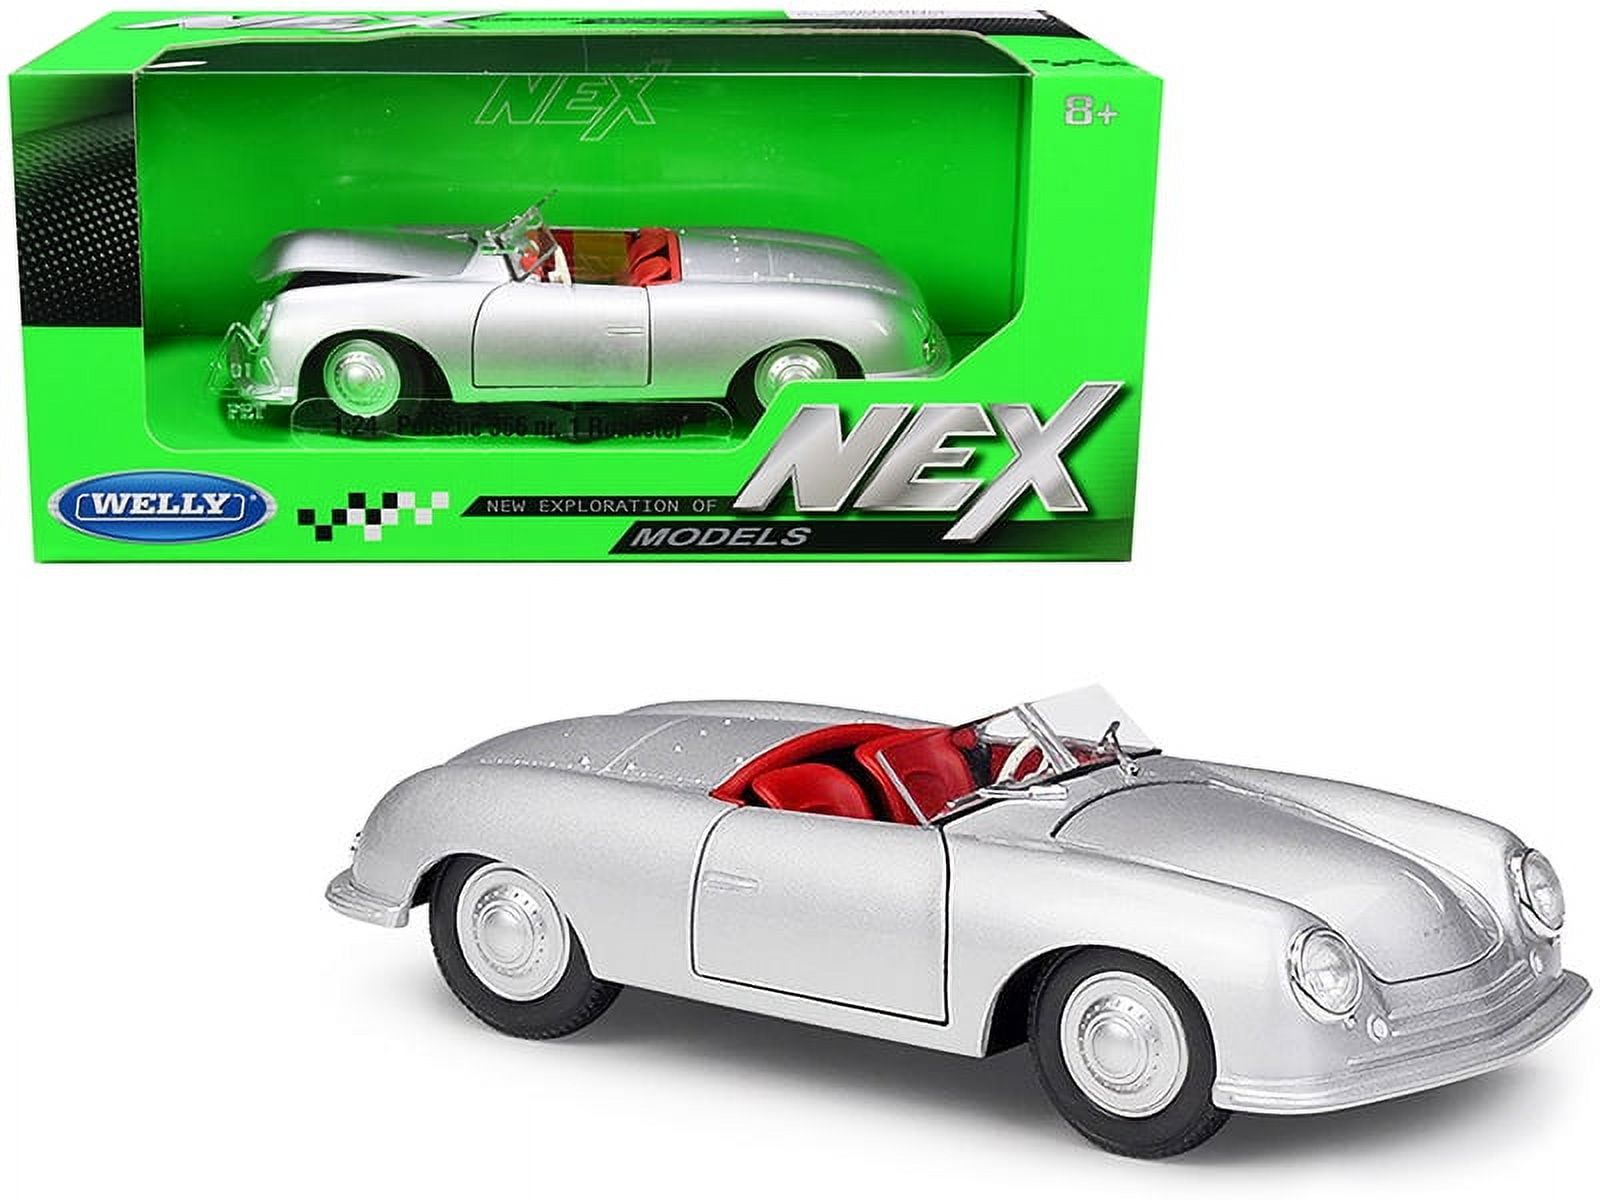 24090sil Porsche 356-1 Roadster Silver with Red Interior NEX Models 1 by 24 Diecast Model Car -  WELLY